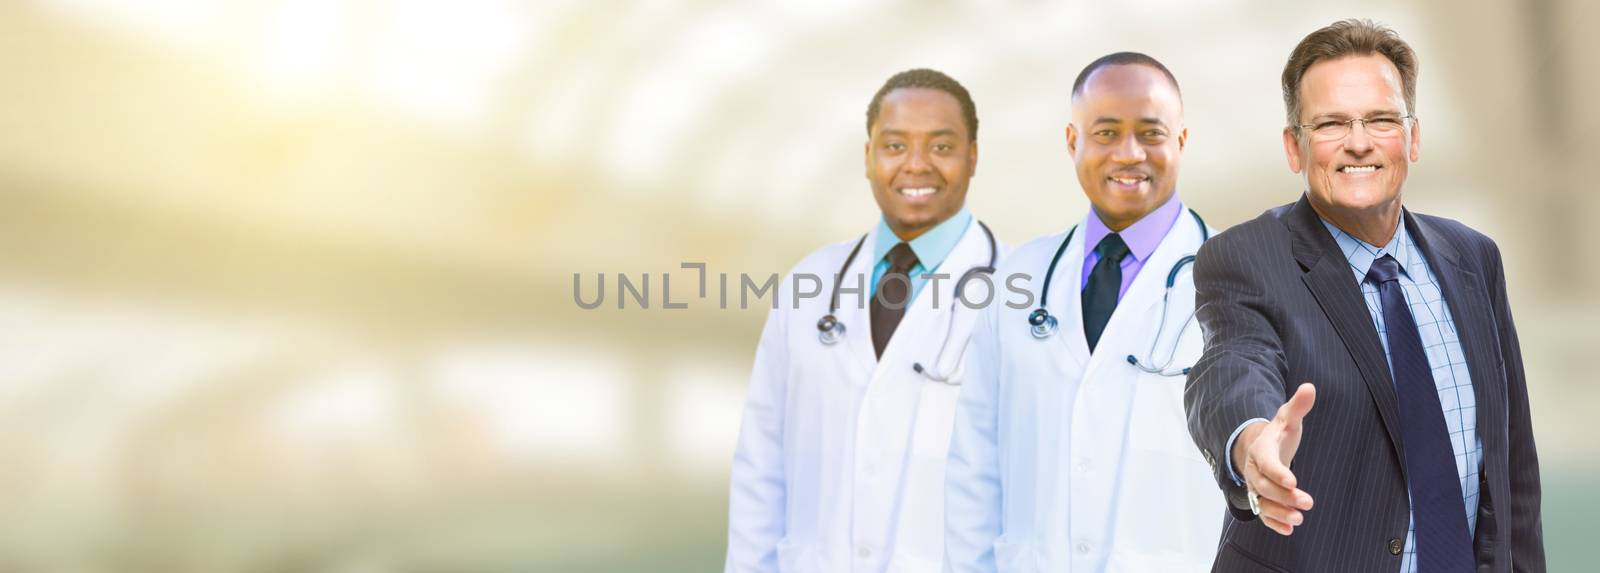 Caucasian Businessman and African American Male Doctors, Nurses or Pharmacists with Room For Text.